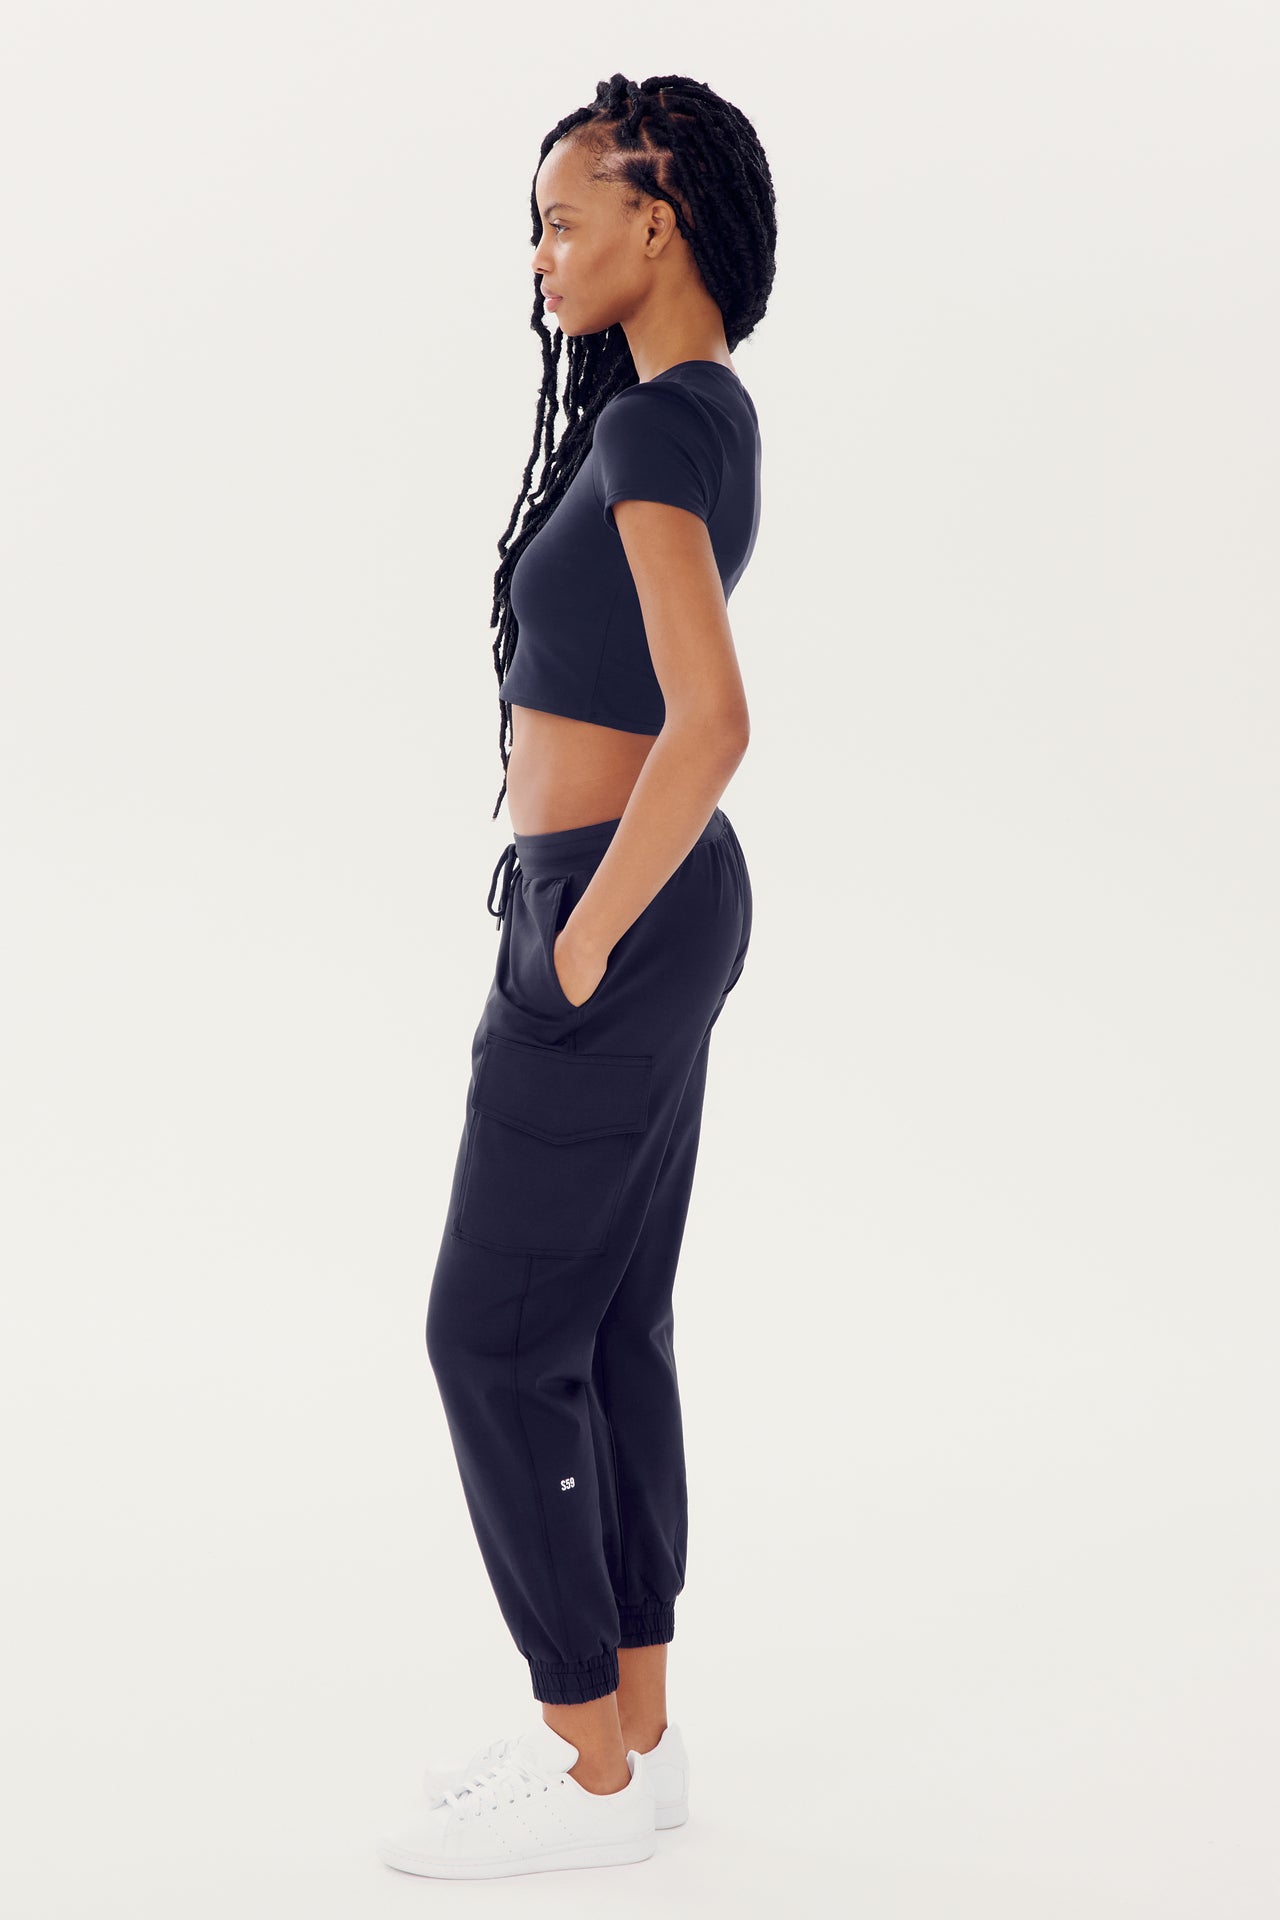 A woman wearing a SPLITS59 Airweight S/S Crop - Indigo and sportswear, standing in profile against a white background.